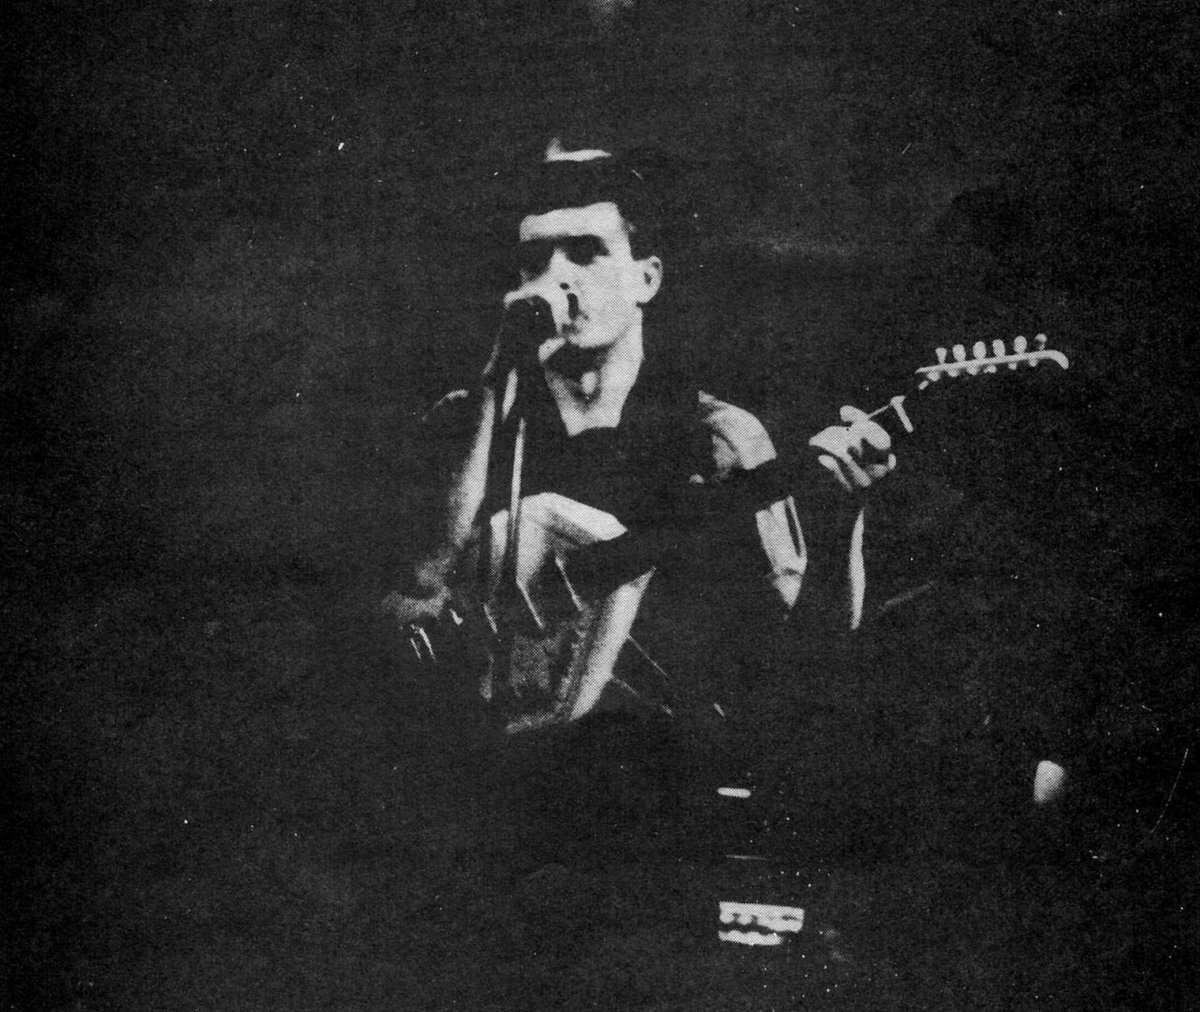 Ian Curtis, from Tidal Wave fanzine issue #2, 1980

#IanCurtis #joydivision #80s #80smusic #80srock #punk #newwave #postpunk #rock #rockmusic #music #alternativemusic #alternativerock #musicphoto #rockhistory #musichistory